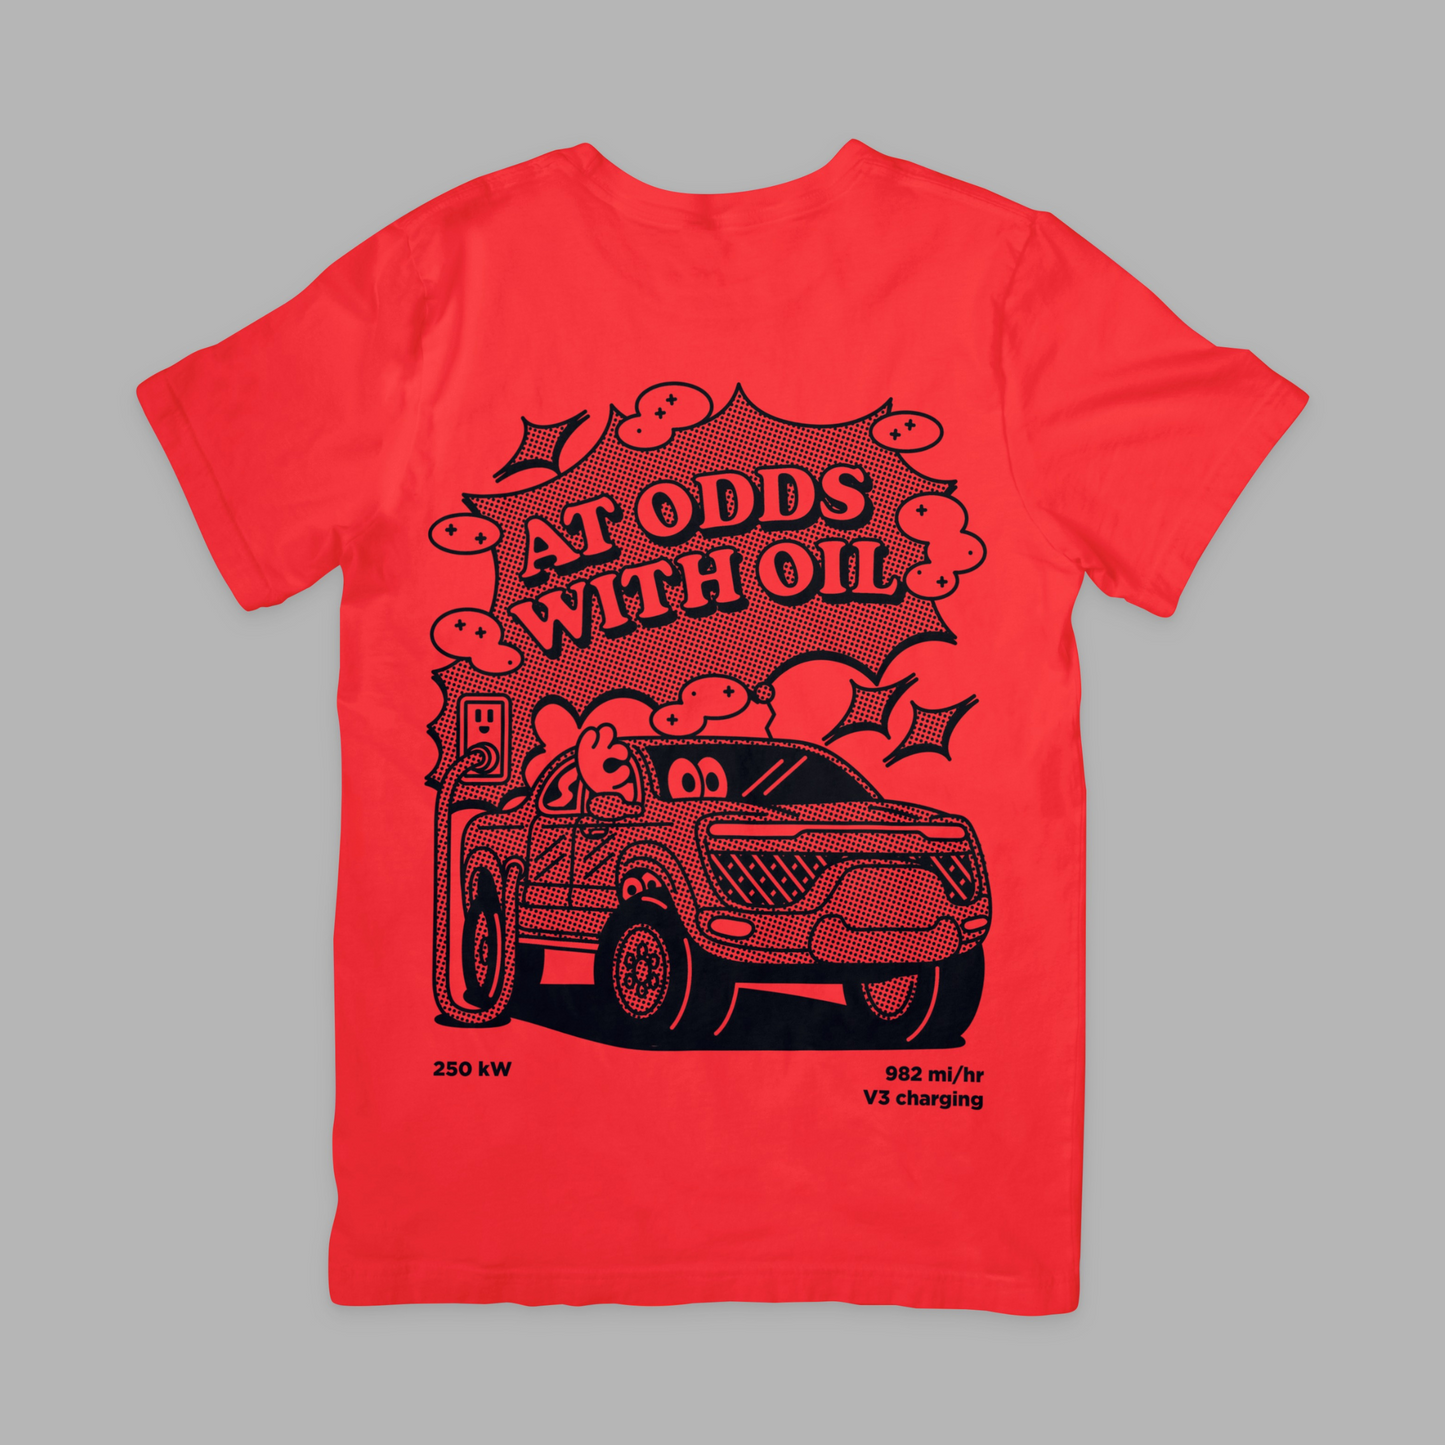 At Odds T-shirt / Red